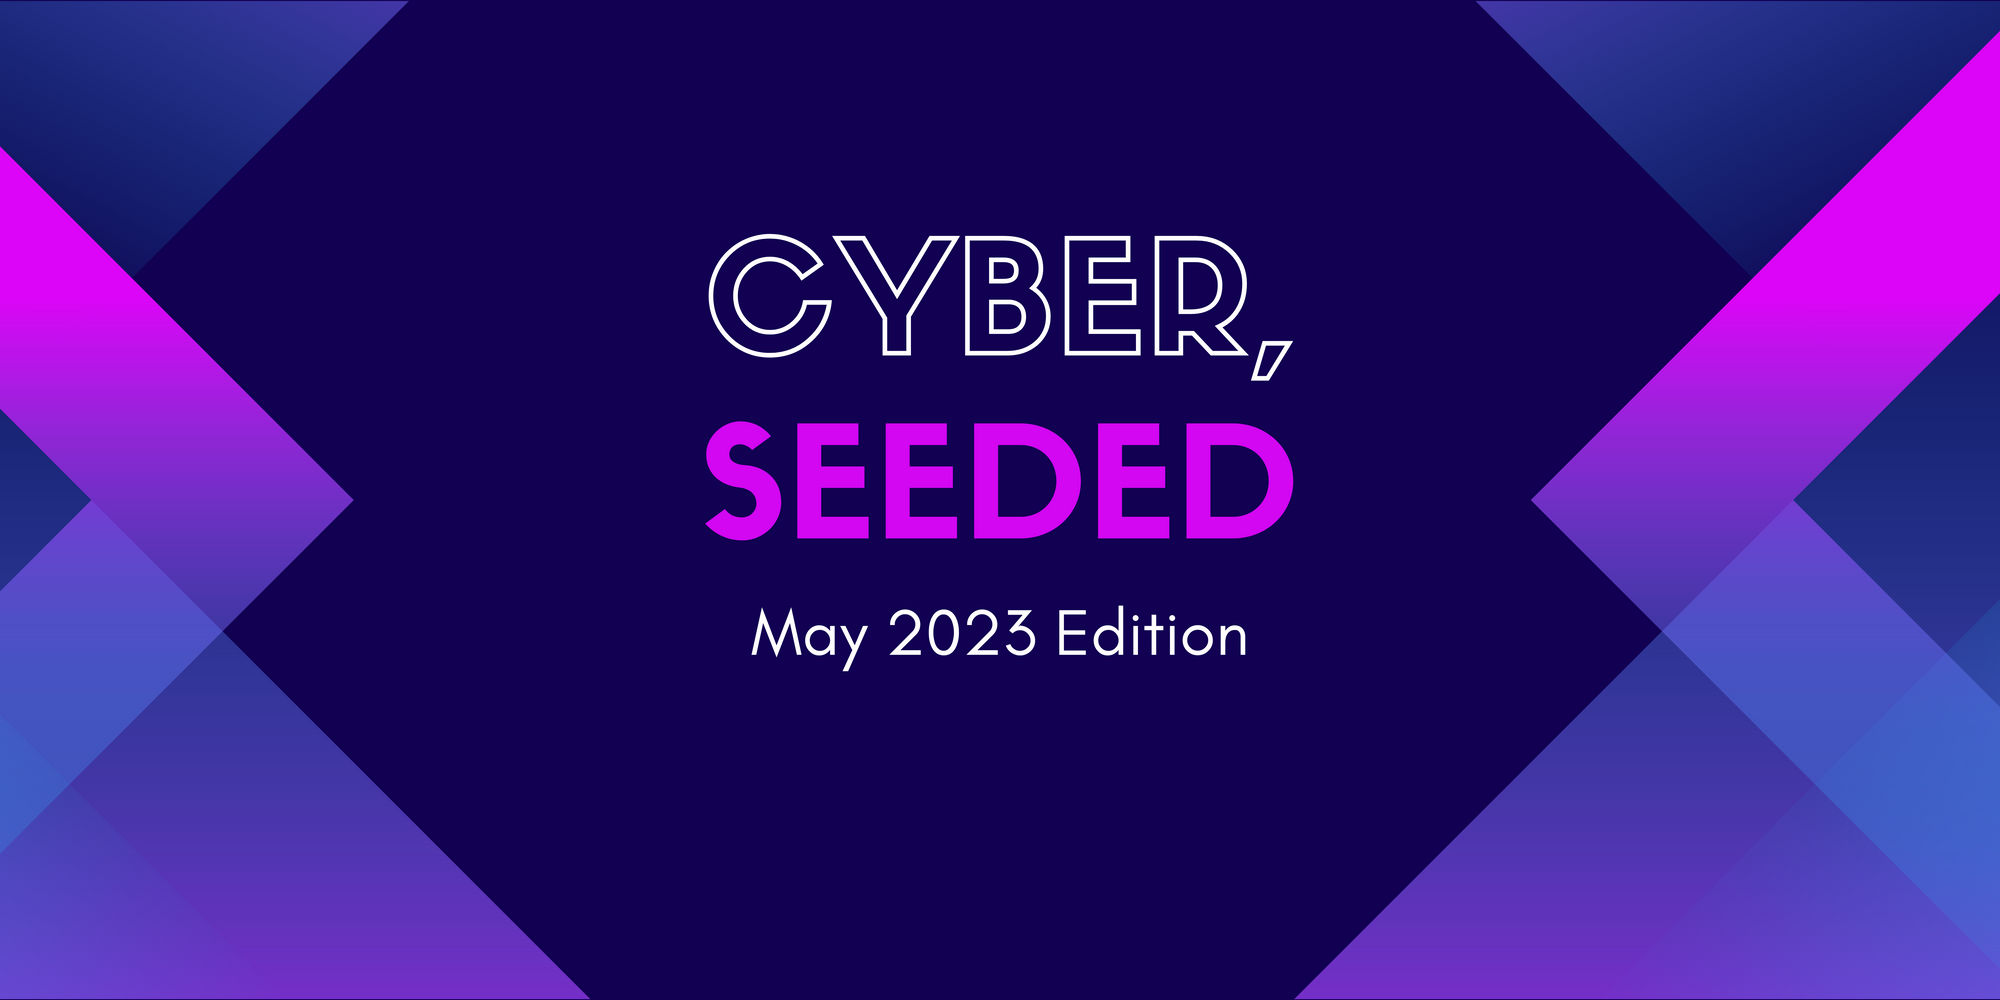 Cyber, Seeded #2 May 2023 Edition